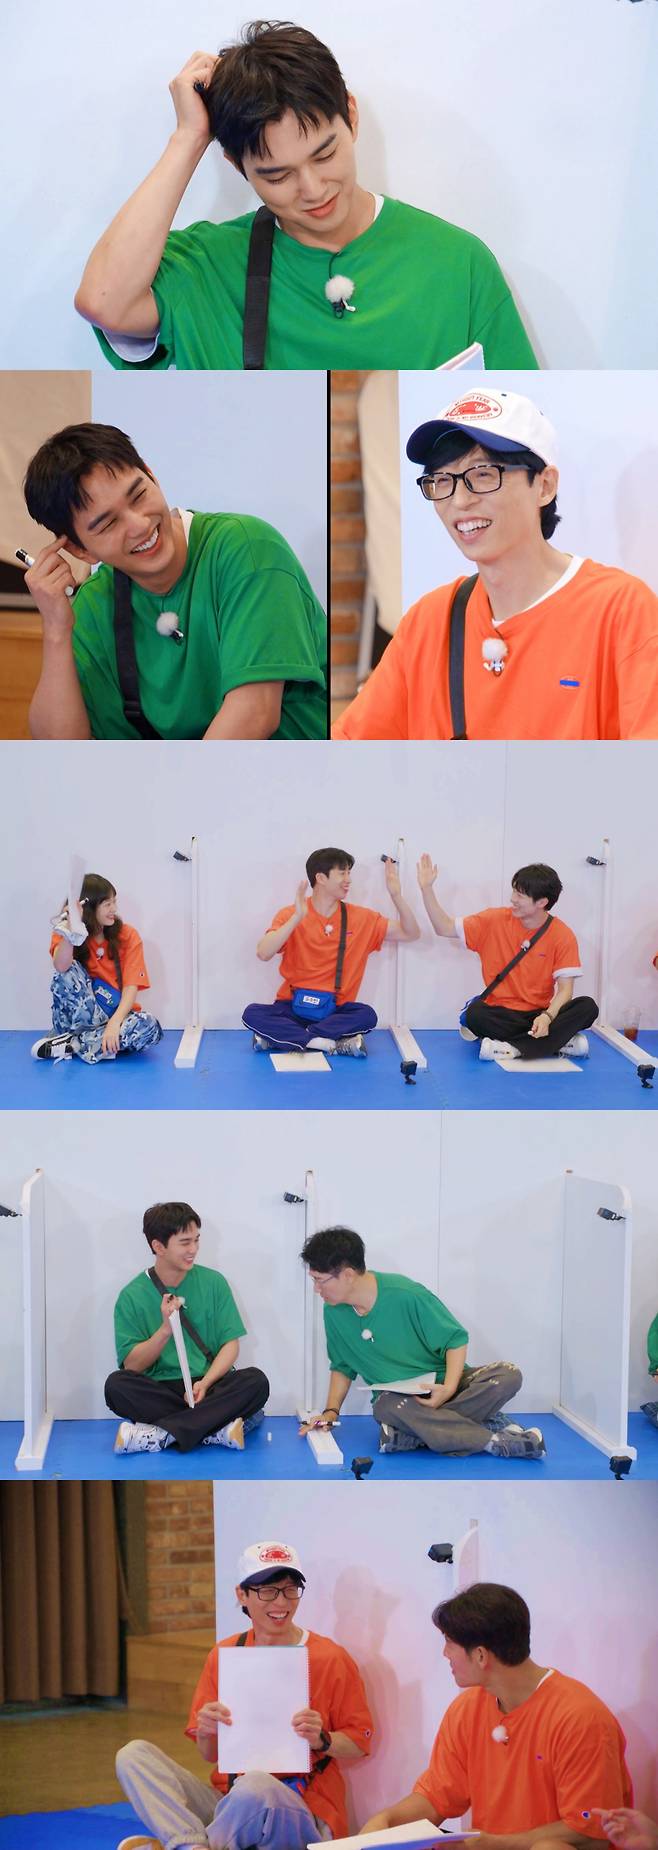 In SBS Running Man broadcasted on the 8th, Parallel theory is revealed between Yoo Jae-Suk and Yoo Seung-ho.The recent recording was the signature relay Grim mission of Running Man.Previously, the members showed incredible unity with all kinds of tricks when they made a grim mission every time they made a grim mission, but this time, the upgraded contest was held by combining the character quiz and Grim.Yoo Jae-Suk and Yoo Seung-ho came out as the first runners of the relay Grim.Yoo Jae-Suk showed a unique style every time a Grim-related mission was given, which made the scene embarrassing. Again, I appealed to my confidence that I only draw points! And You have to understand my style.Yoo Seung-ho was also confident with a smile, and Yoo Su-bin cheered, saying, Yoo Seung-ho is from the gold medal of the art competition.After the full mission began, various stars were presented, and the two burned their art souls.Yoo Jae-Suk expressed all the characters in short and bold points, while Yoo Seung-ho shocked everyone by creating a half-person figure.When the unexpected Grim appeared, the members laughed at the Parallel theory about the Grim ability of the Tuyu Brothers, saying, I think they are going through something and I have to look at it as a magic child.